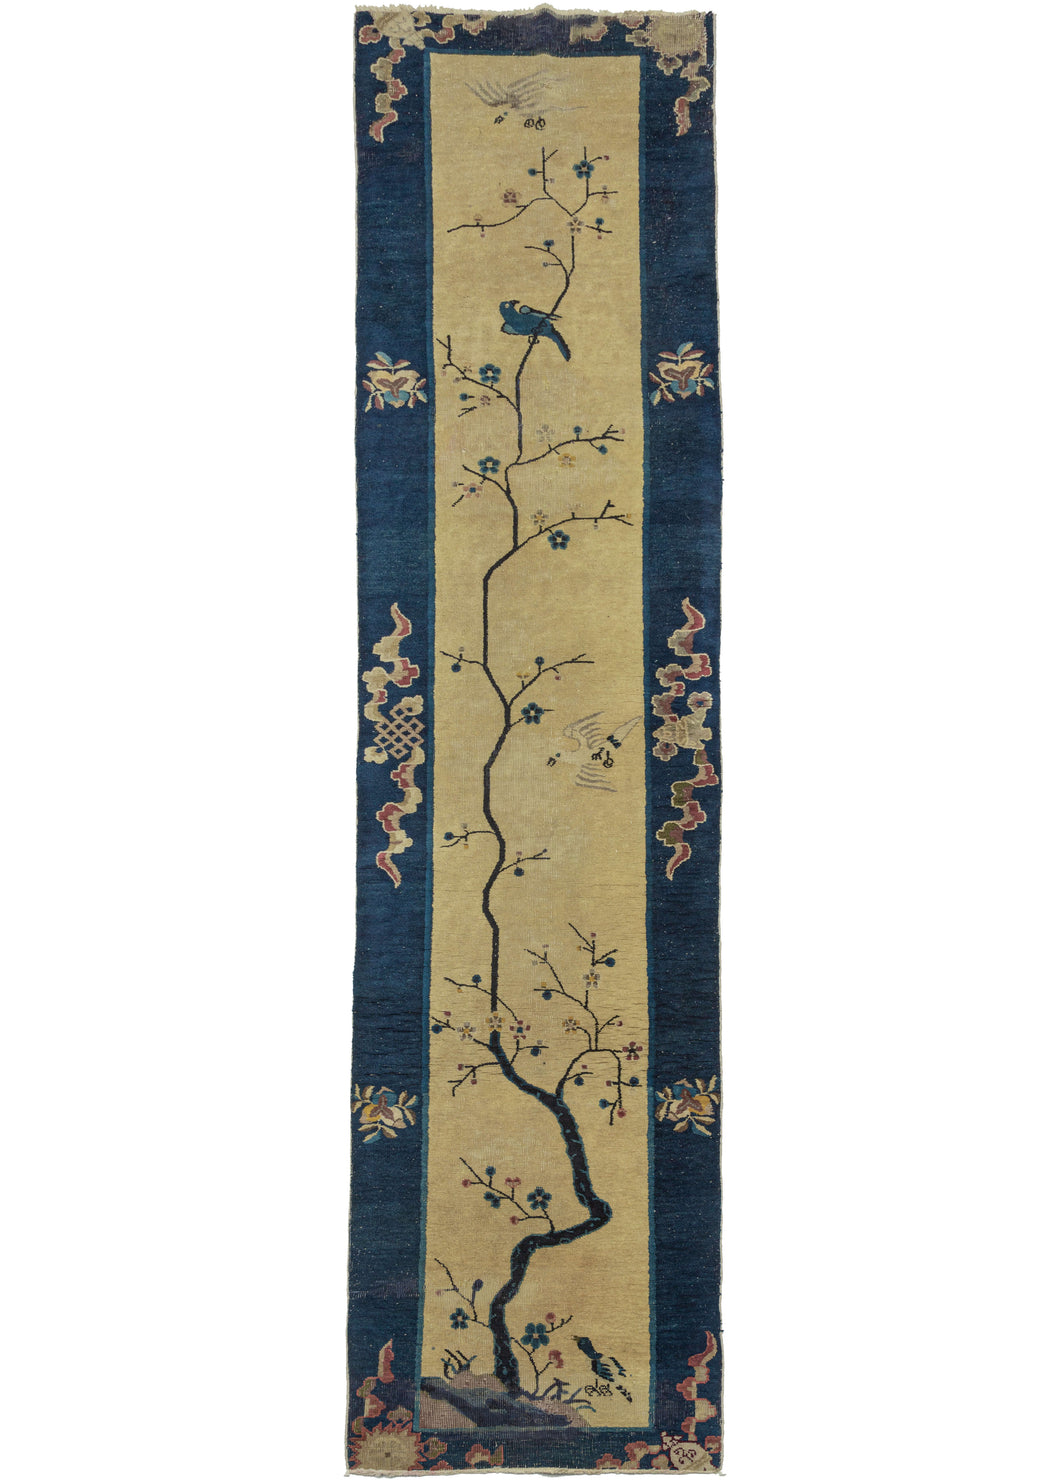 This Tree Deco Runner Rug features a thin tree growing upwards in a very organic manner on a yellow ground. The branches are sparsely adorned with buds and blossoming rosettes. A blue bird is perched on one of the branches near the top as one yellow bird flies above it and another yellow bird flies below. It is framed by a navy border that is mostly open except for various auspicious symbols wrapped in bent ribbon cloud bands.